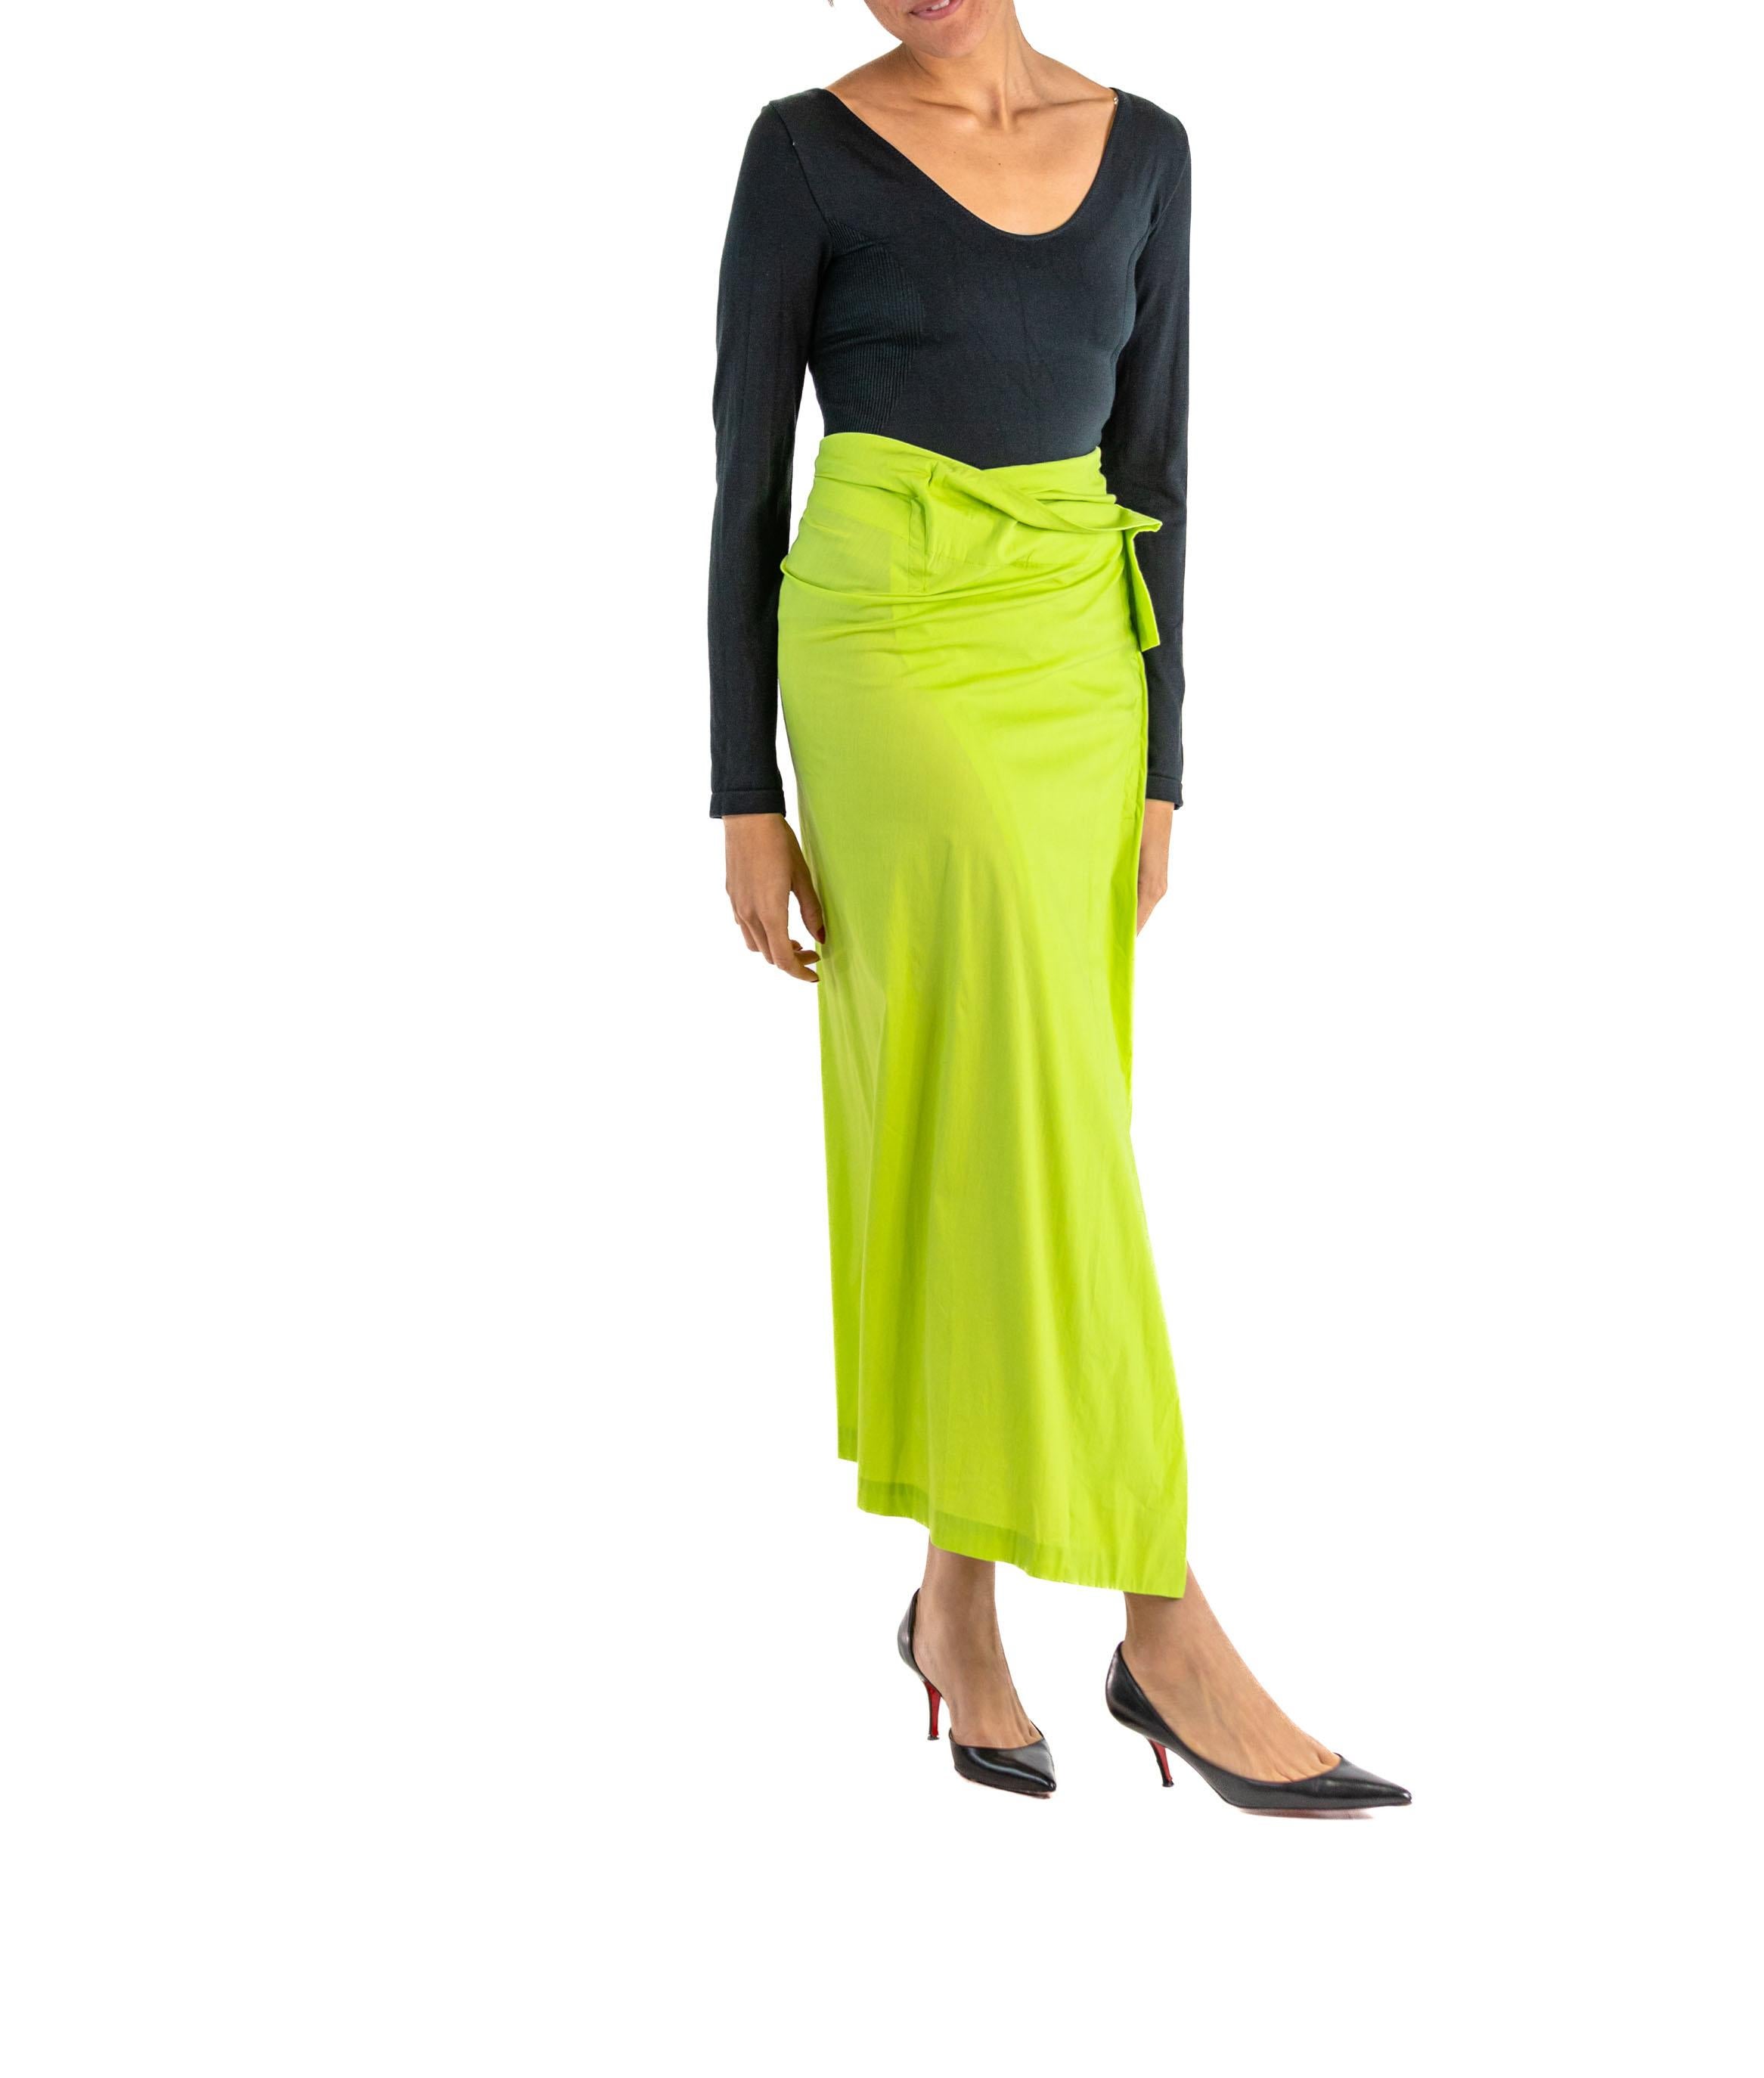 1990S ISSEY MIYAKE Lime Green & Black Rayon Blend Scoop Neck Top Skirt Ensemble For Sale 2